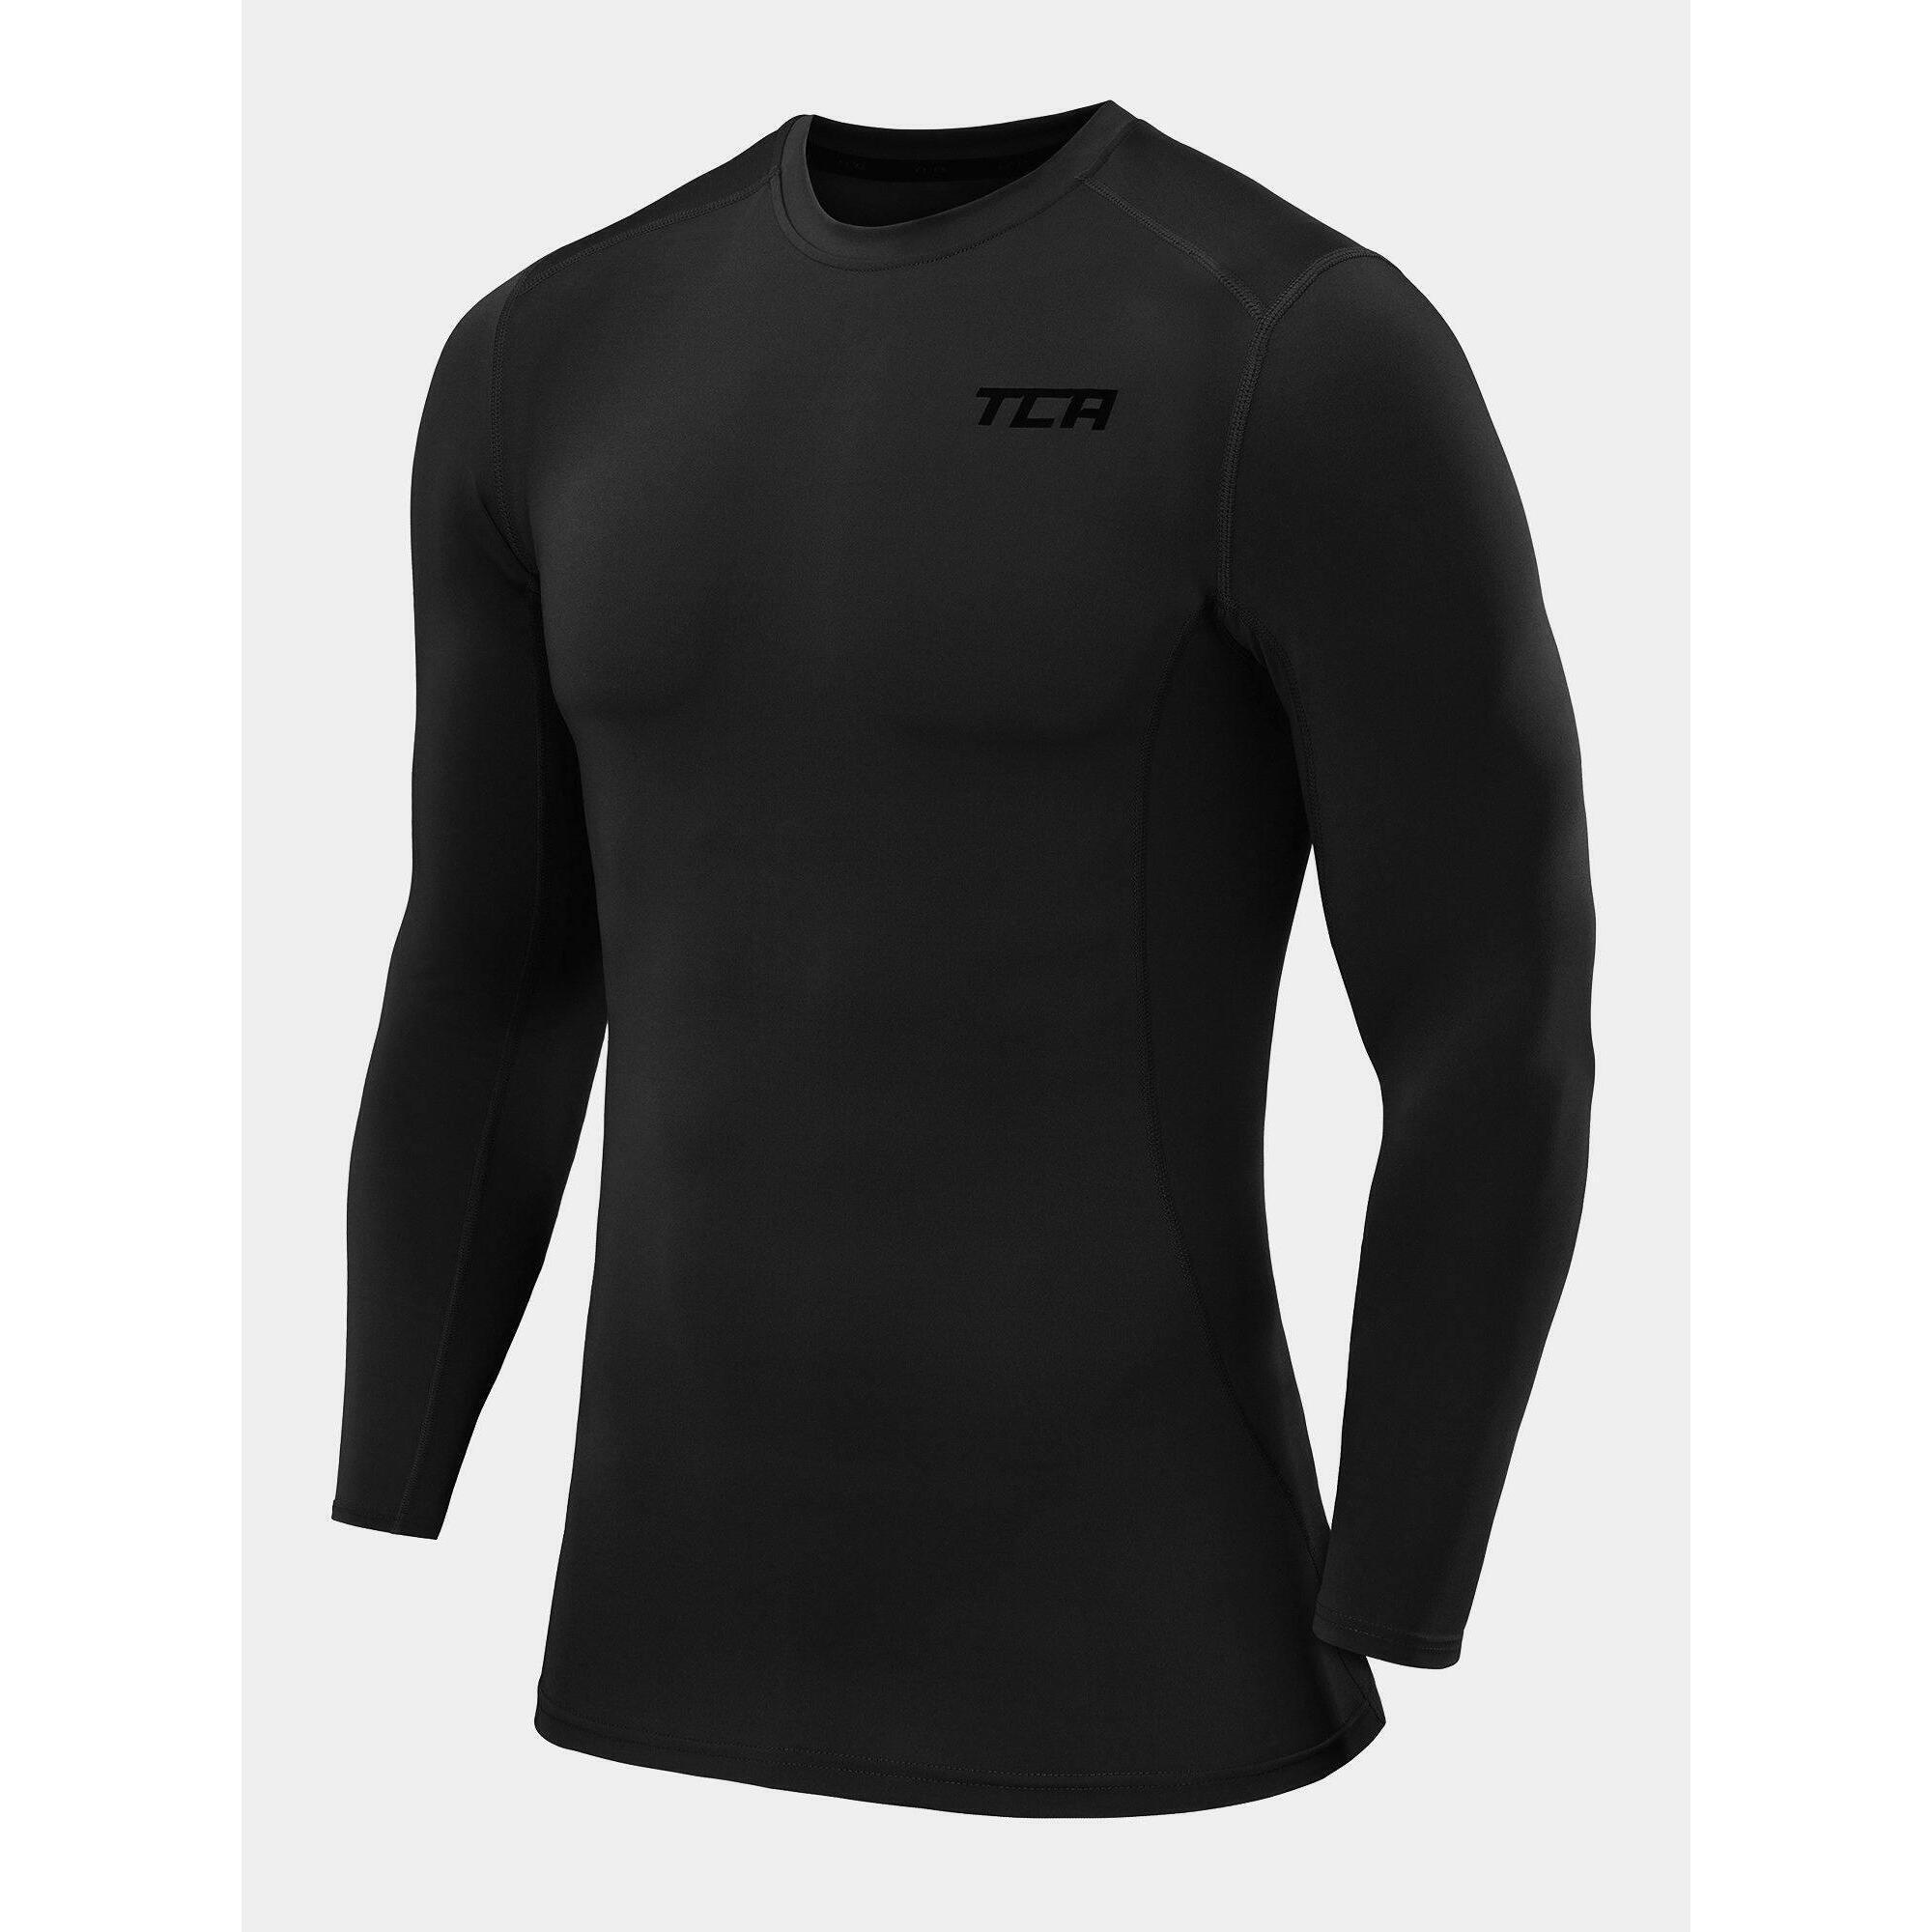 Men's Power Base Layer Compression Long Sleeve Top - Black Stealth